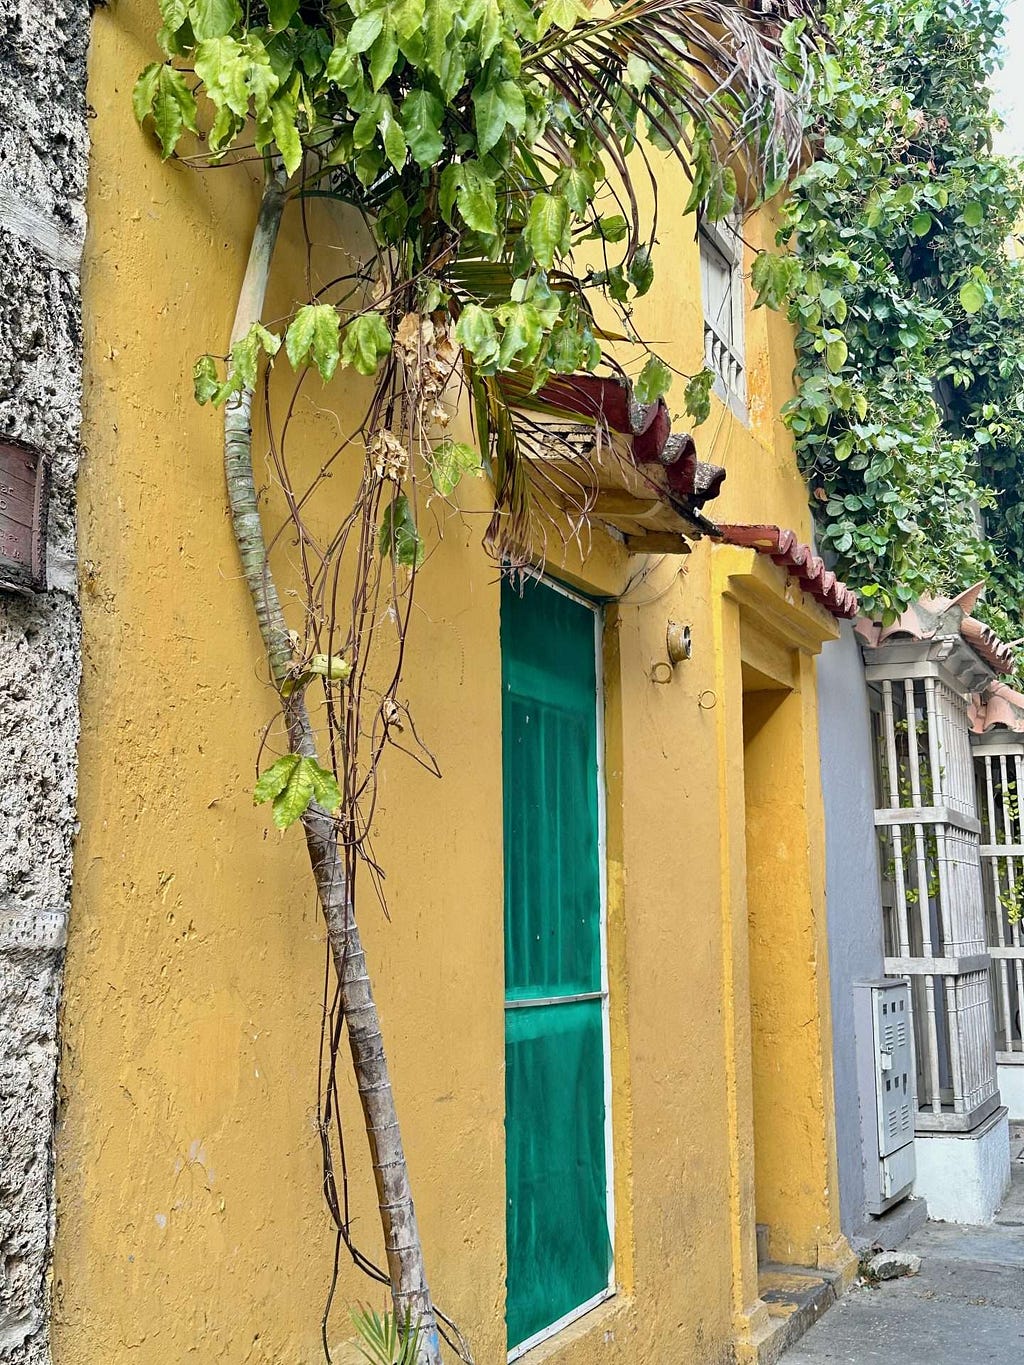 A yellow building in Cartagena, Colombia with a green door, windows with white bars, and leafy plants growing around it. A curved tree trunk is leaning against the wall.